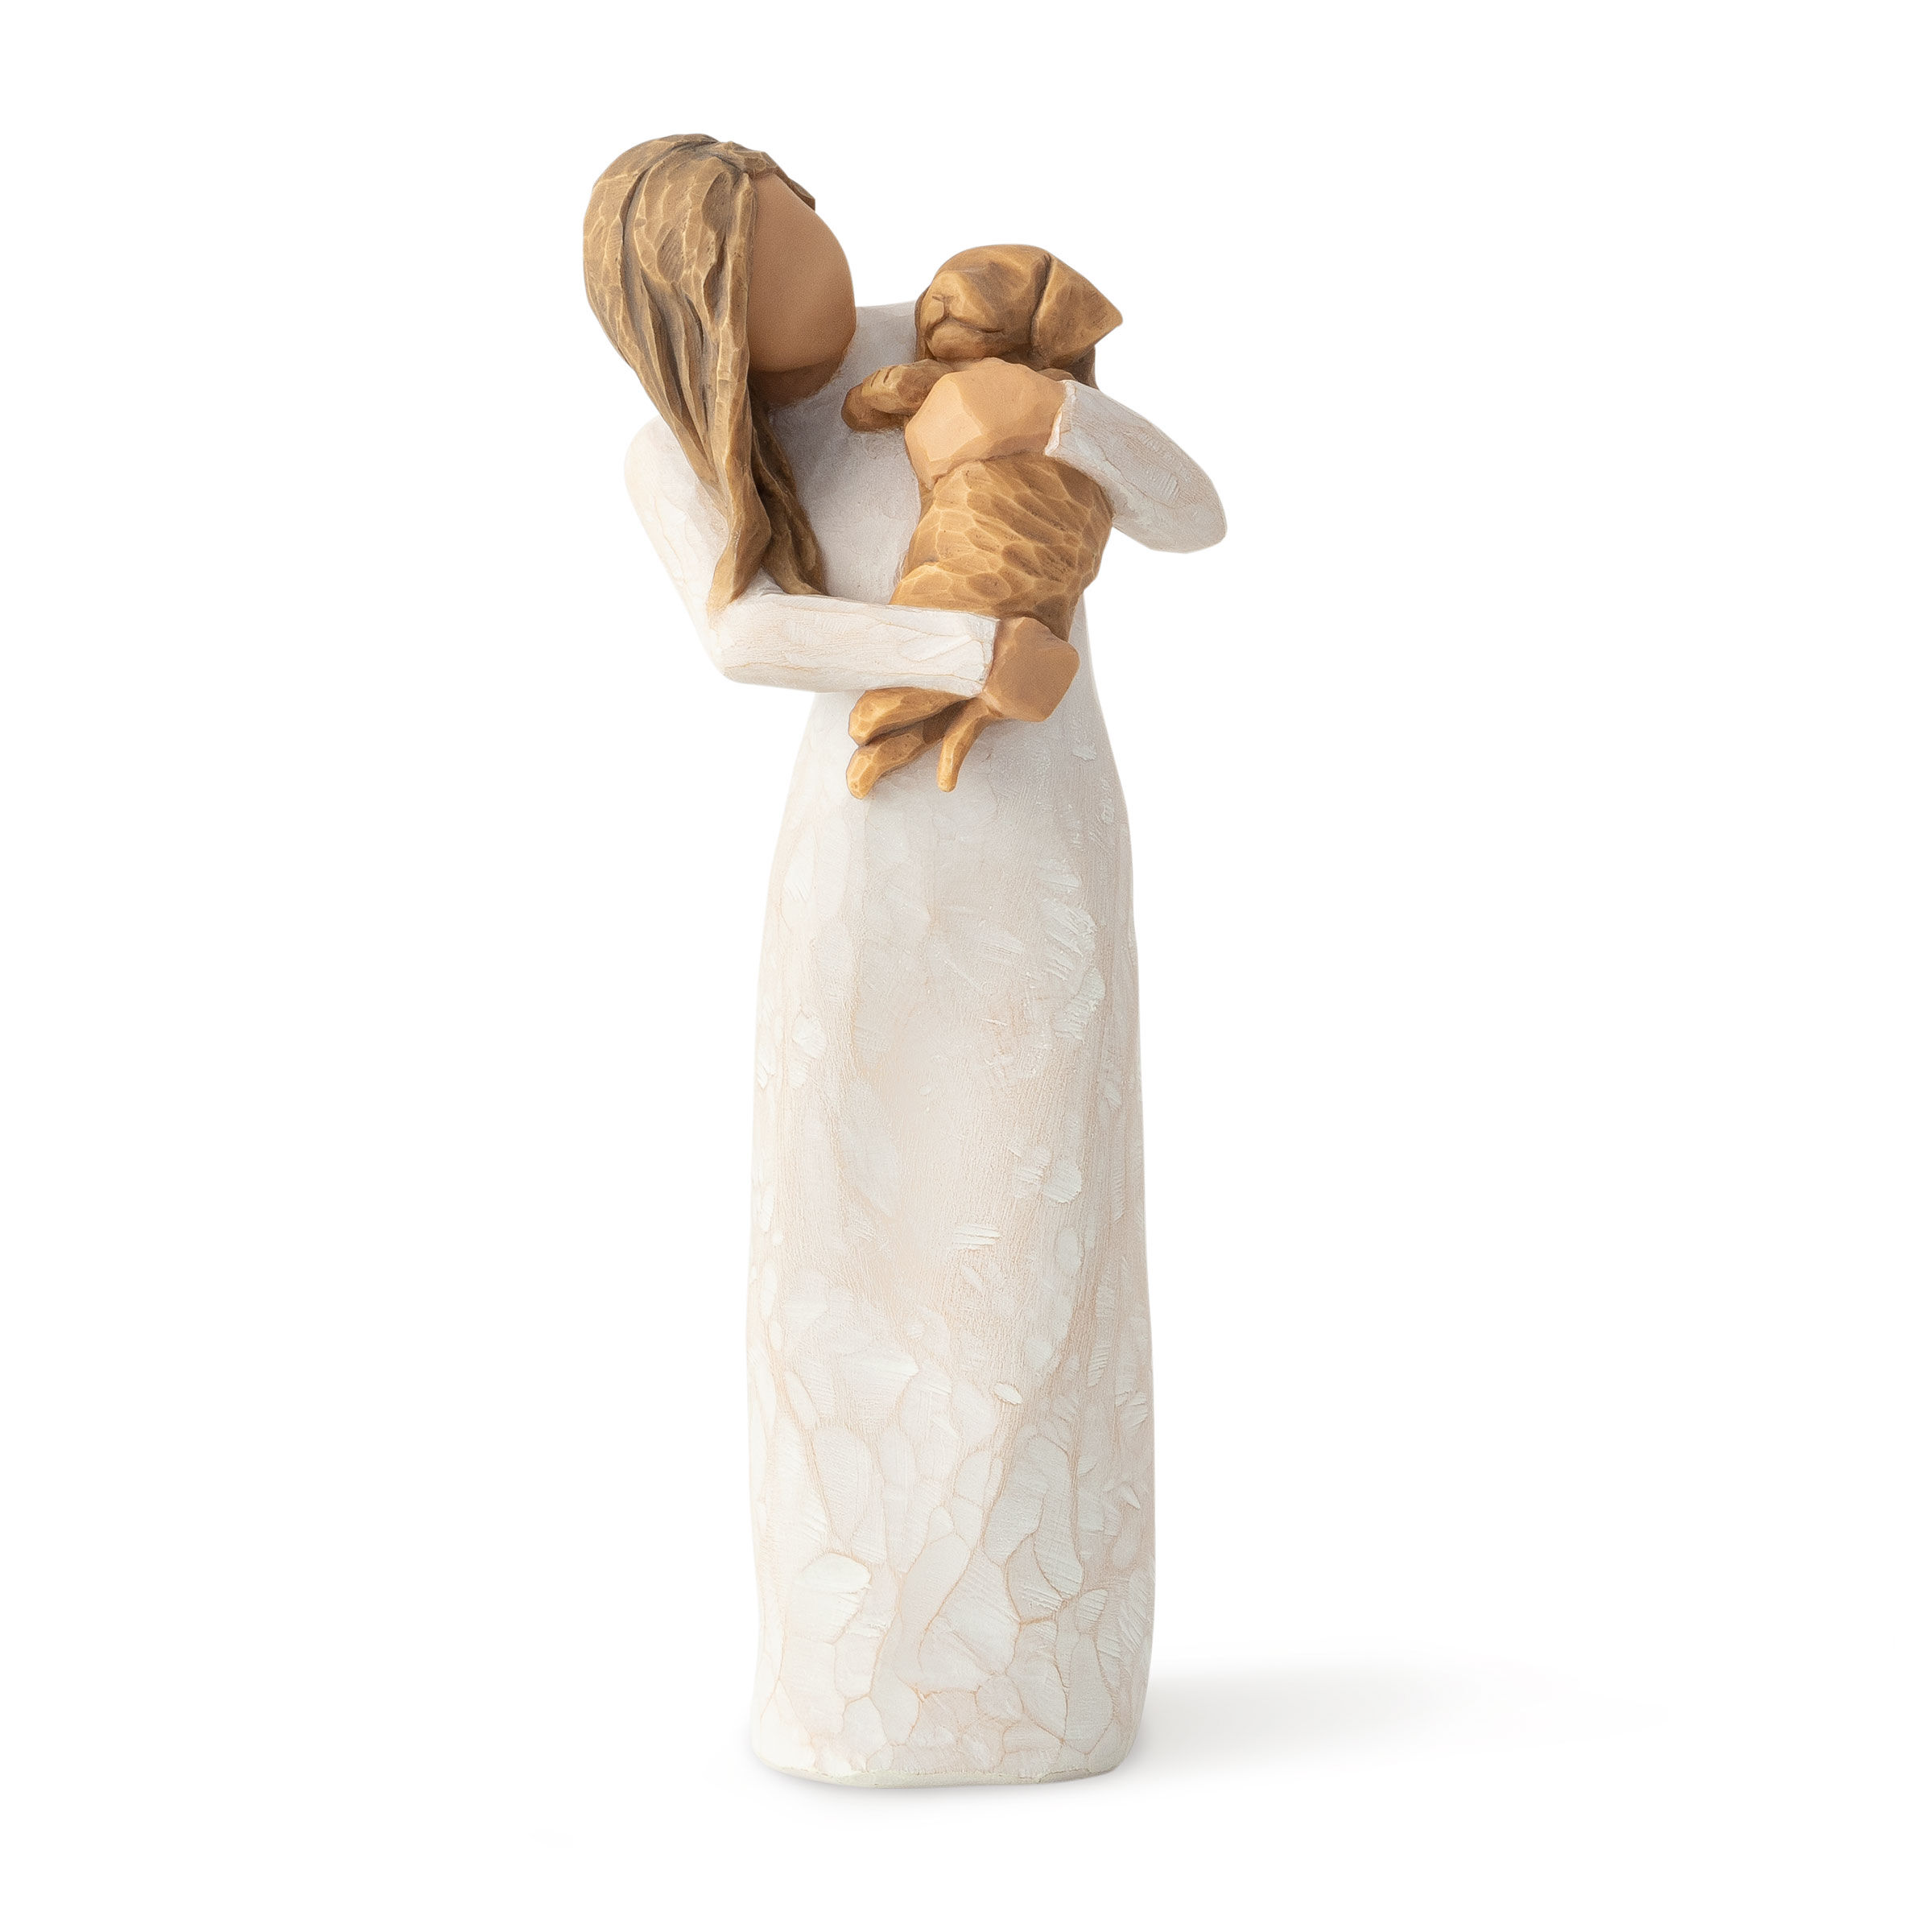 Willow Tree Adorable You Golden Dog Figurine, 7.5" for only USD 52.99 | Hallmark